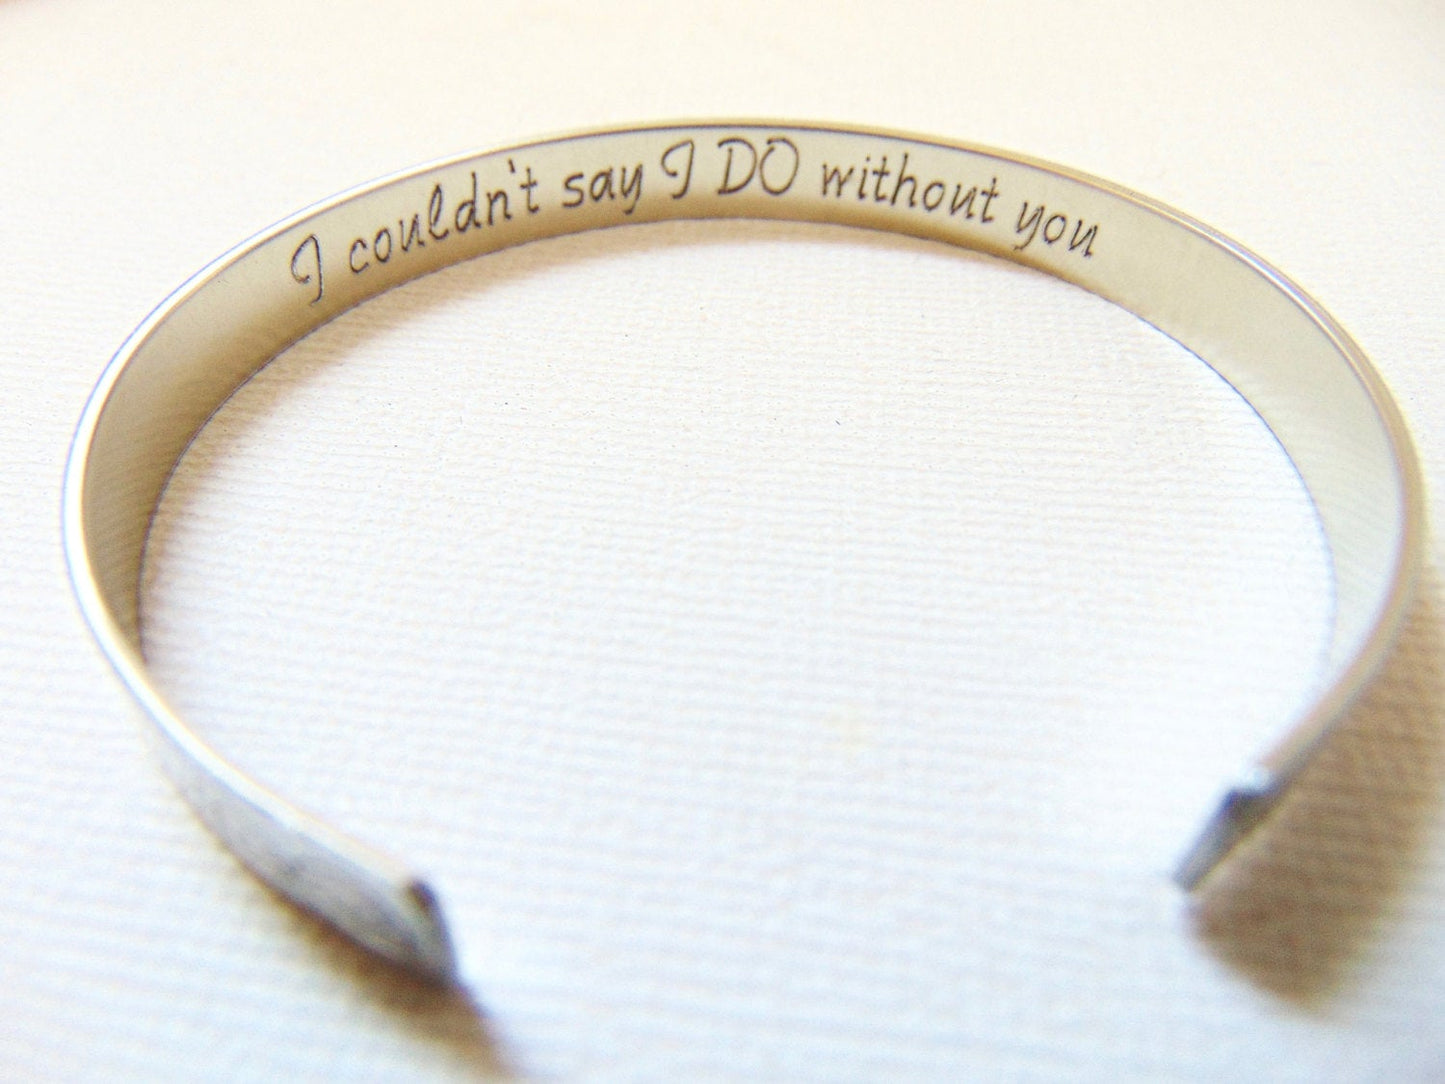 Quote or message engraved on Gold Cuff bangle